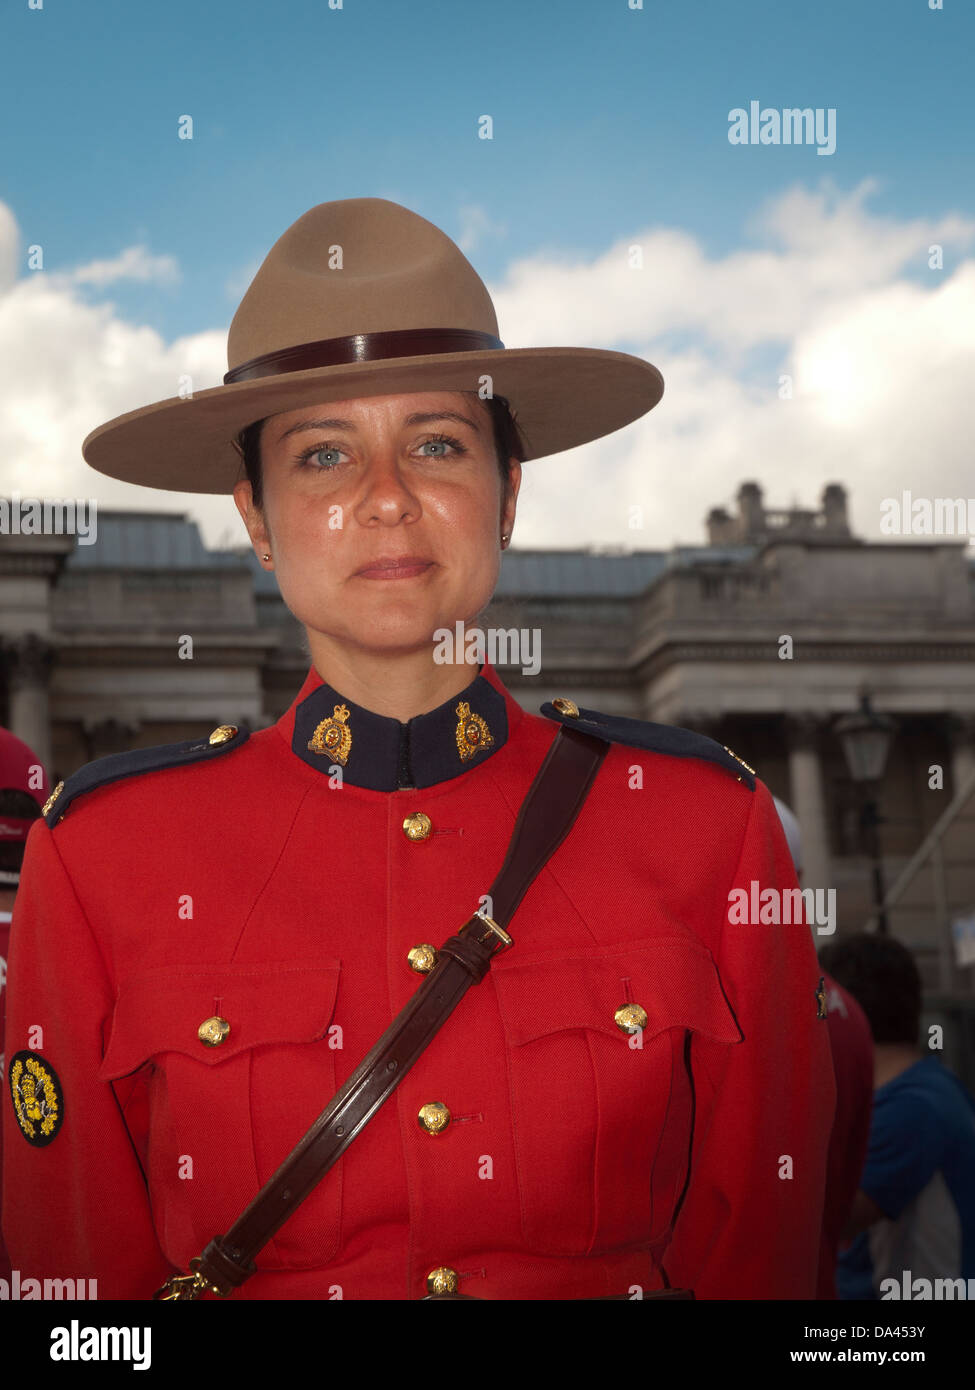 A Canadian Mountie at Canada Day celebrations in London Stock Photo - Alamy